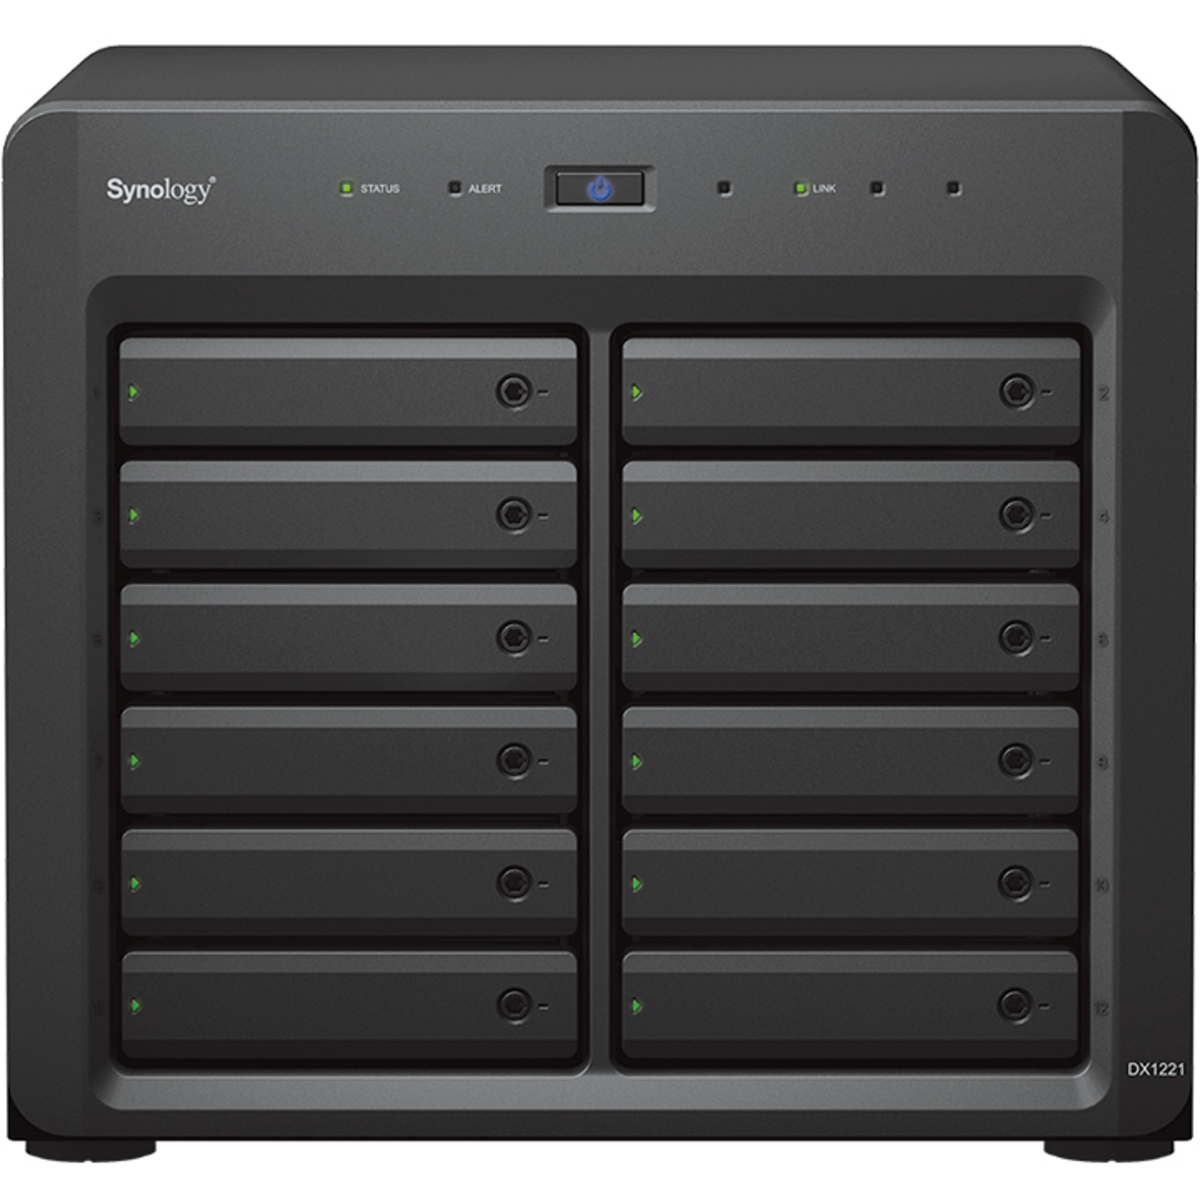 Synology DX1222 External Expansion Drive 100tb 12-Bay Desktop Multimedia / Power User / Business Expansion Enclosure 10x10tb Seagate IronWolf ST10000VN000 3.5 7200rpm SATA 6Gb/s HDD NAS Class Drives Installed - Burn-In Tested DX1222 External Expansion Drive